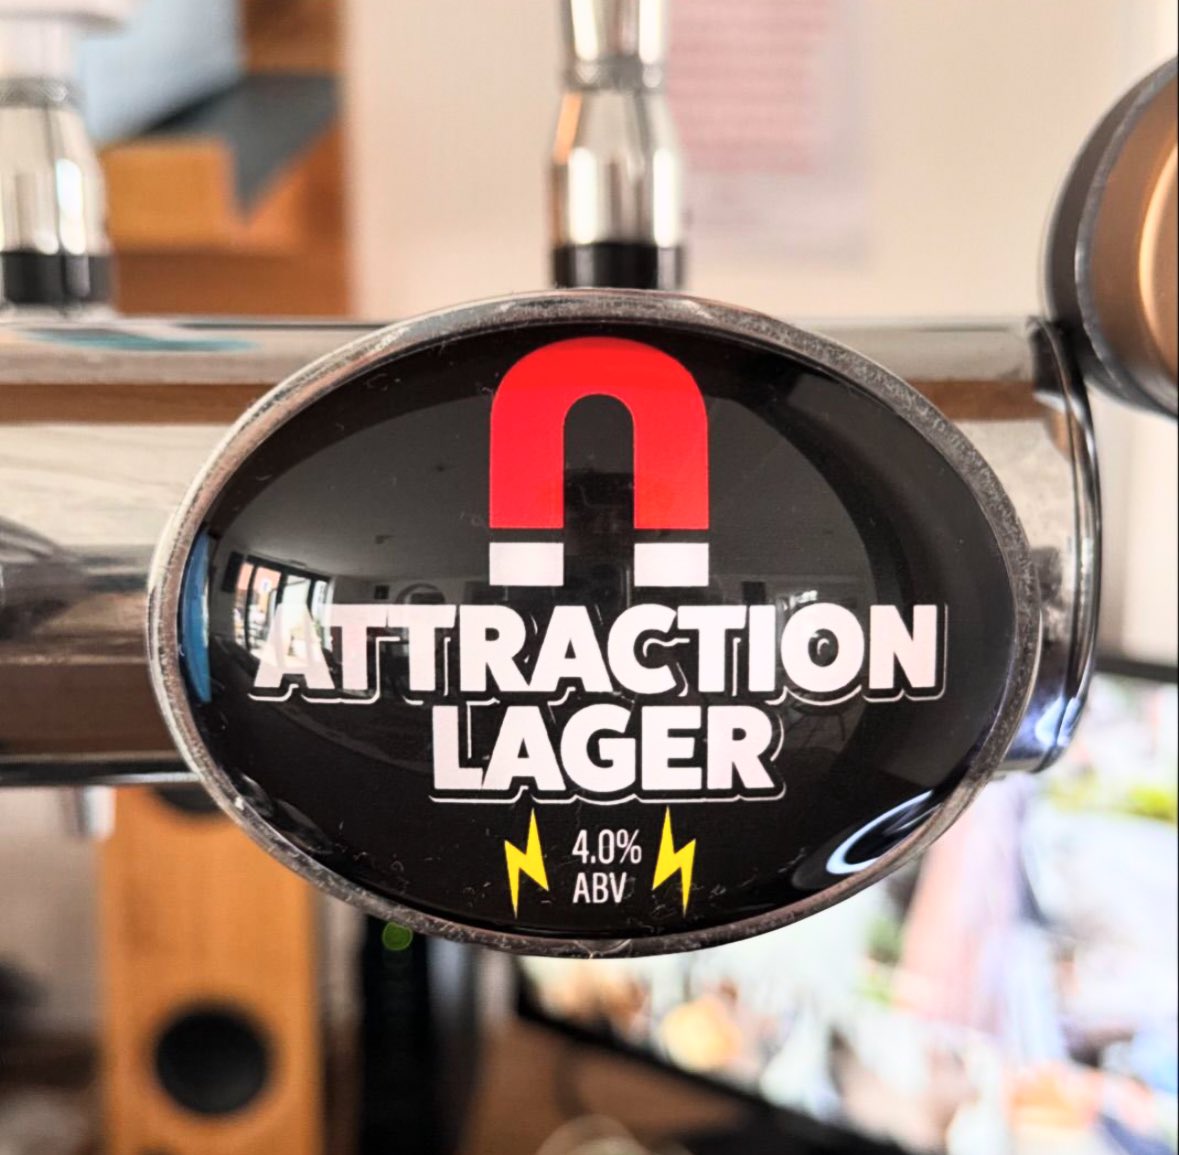 Check this out 🤩

NEW in The Magnet we have Attraction Lager, a very easy drinking lager at 4.0% 🍻🧲

#magnetcolchester
#colchesterbusiness 
#colchesterpub
#colchester
#essexpub
#attraction 
#lager
#micropub

(P.S we did not brew this 😉)